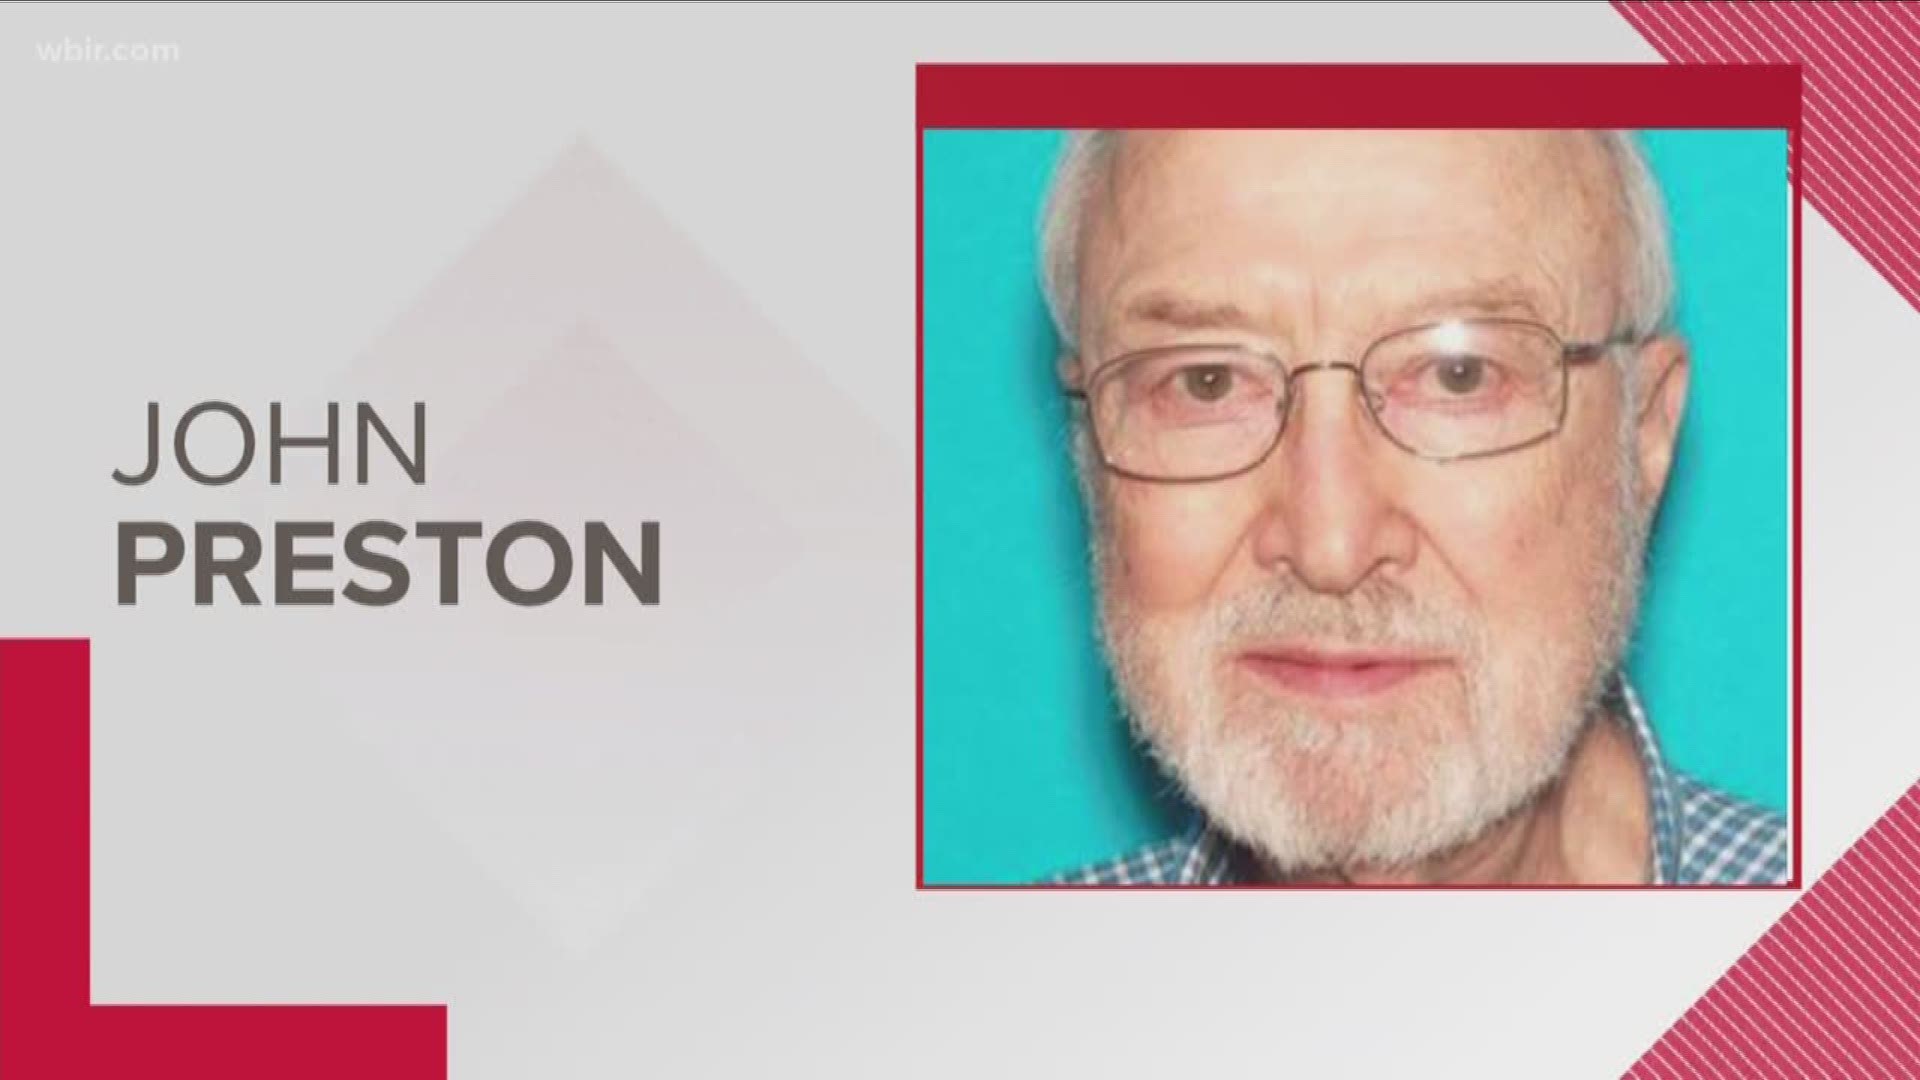 John Preston had been missing since July 10. KCSO said his body was found off Foote Mineral Lane.